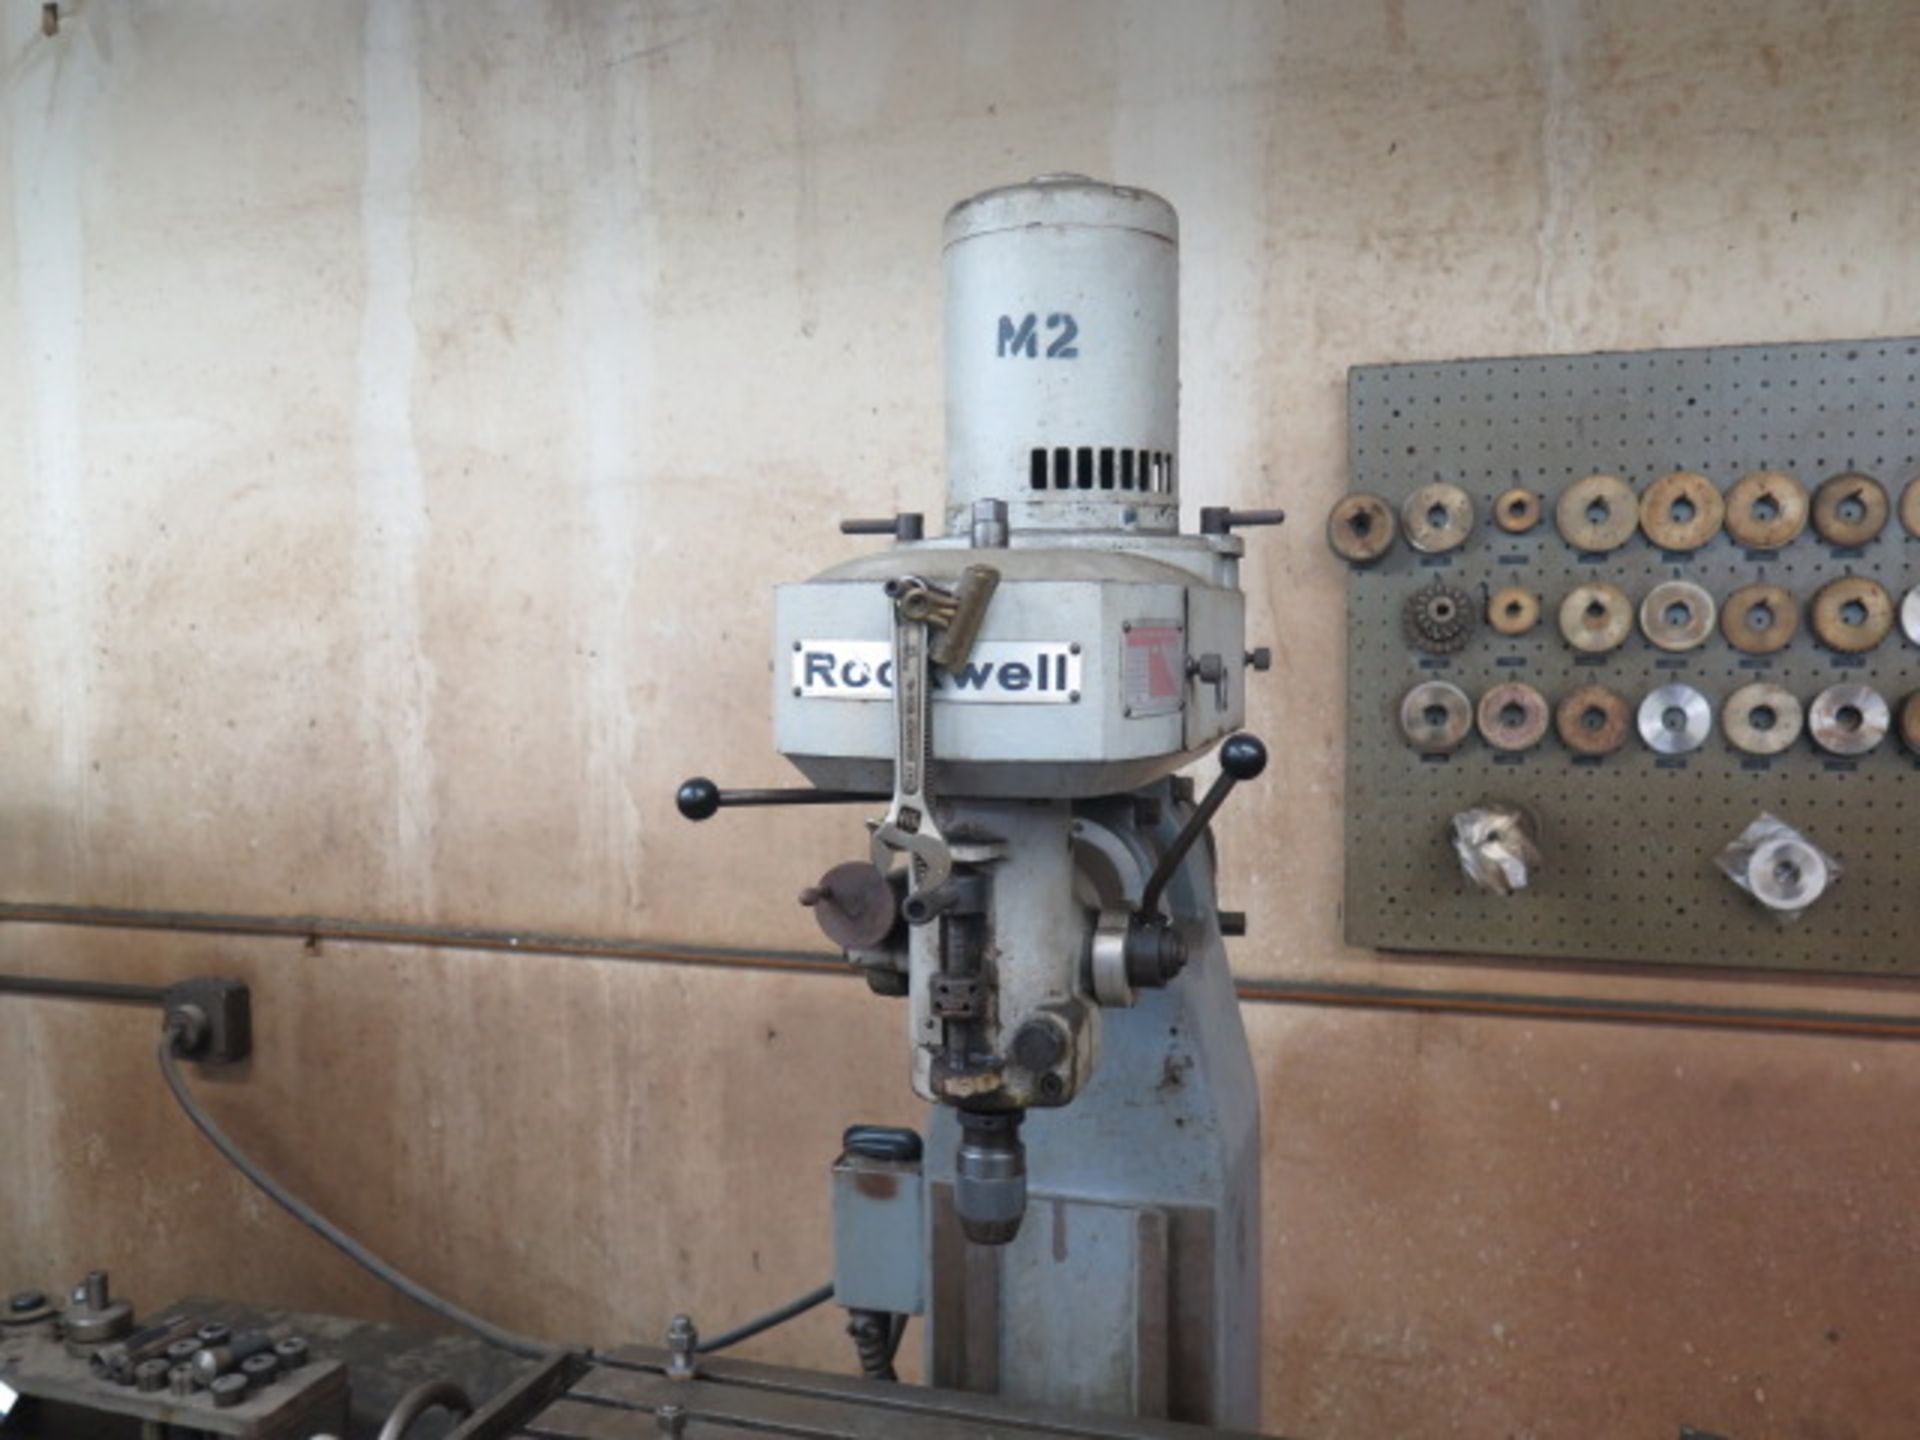 Rockwell Ram Style Vertical Mill w/ 370-6300 RPM, 6-Speeds, R8 Spindle, Power Feed, SOLD AS IS - Image 3 of 10